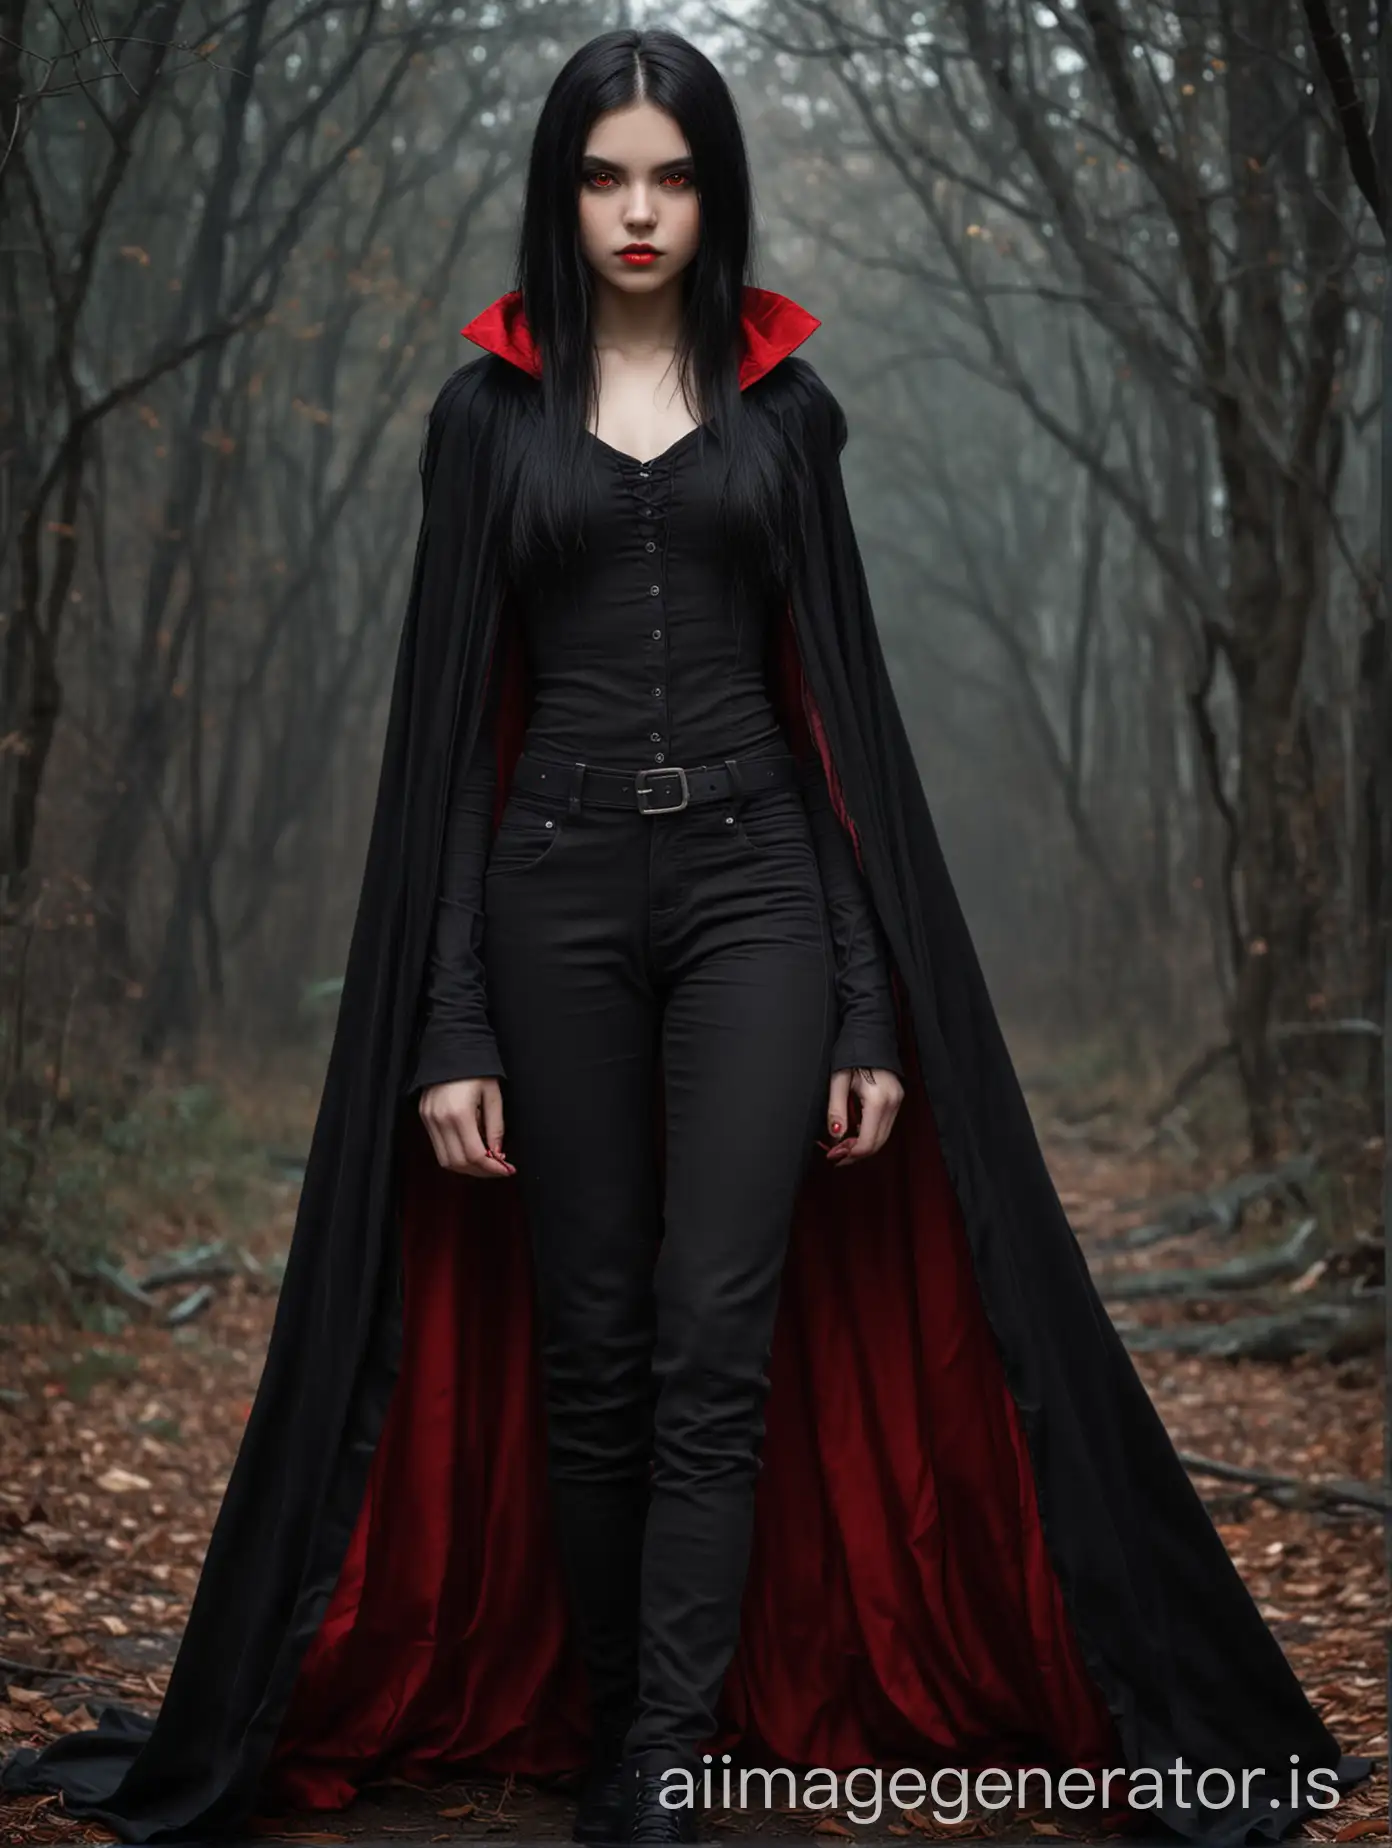 Mysterious-BlackHaired-Vampire-Teen-in-Dramatic-Cape-and-Fiery-Eyes